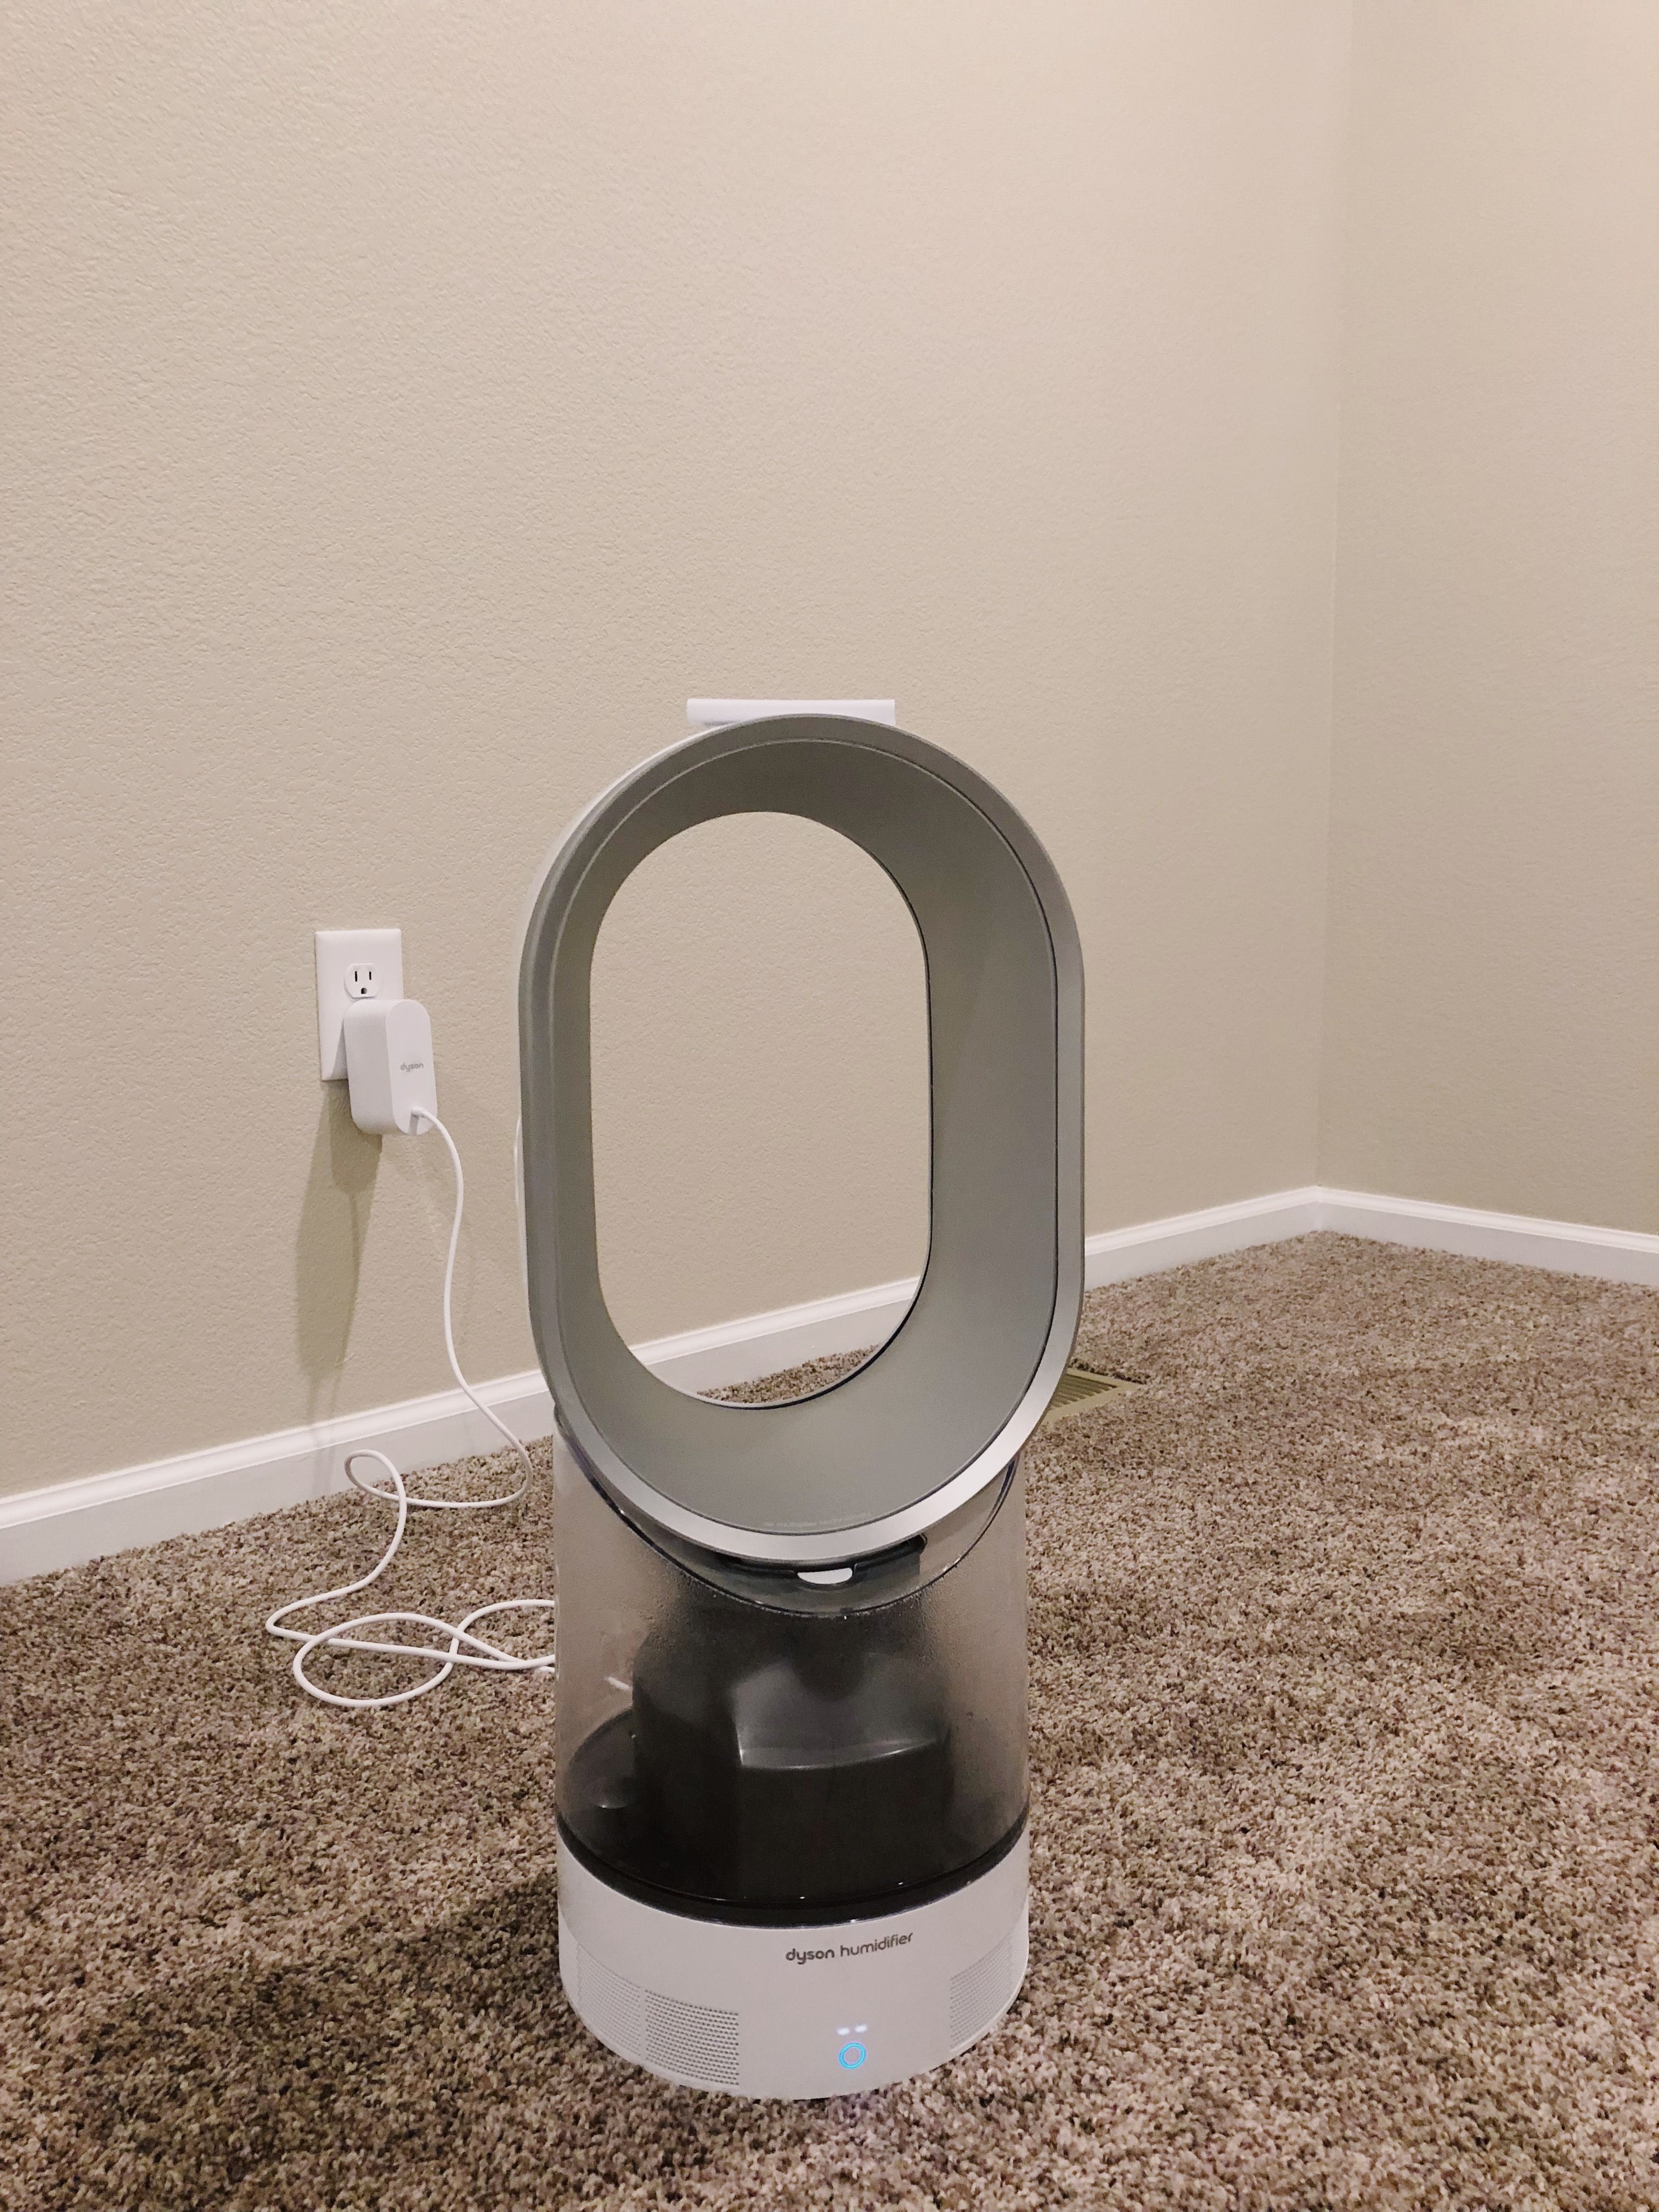 Review on Dyson humidifier/戴森加湿器测评— Steemit